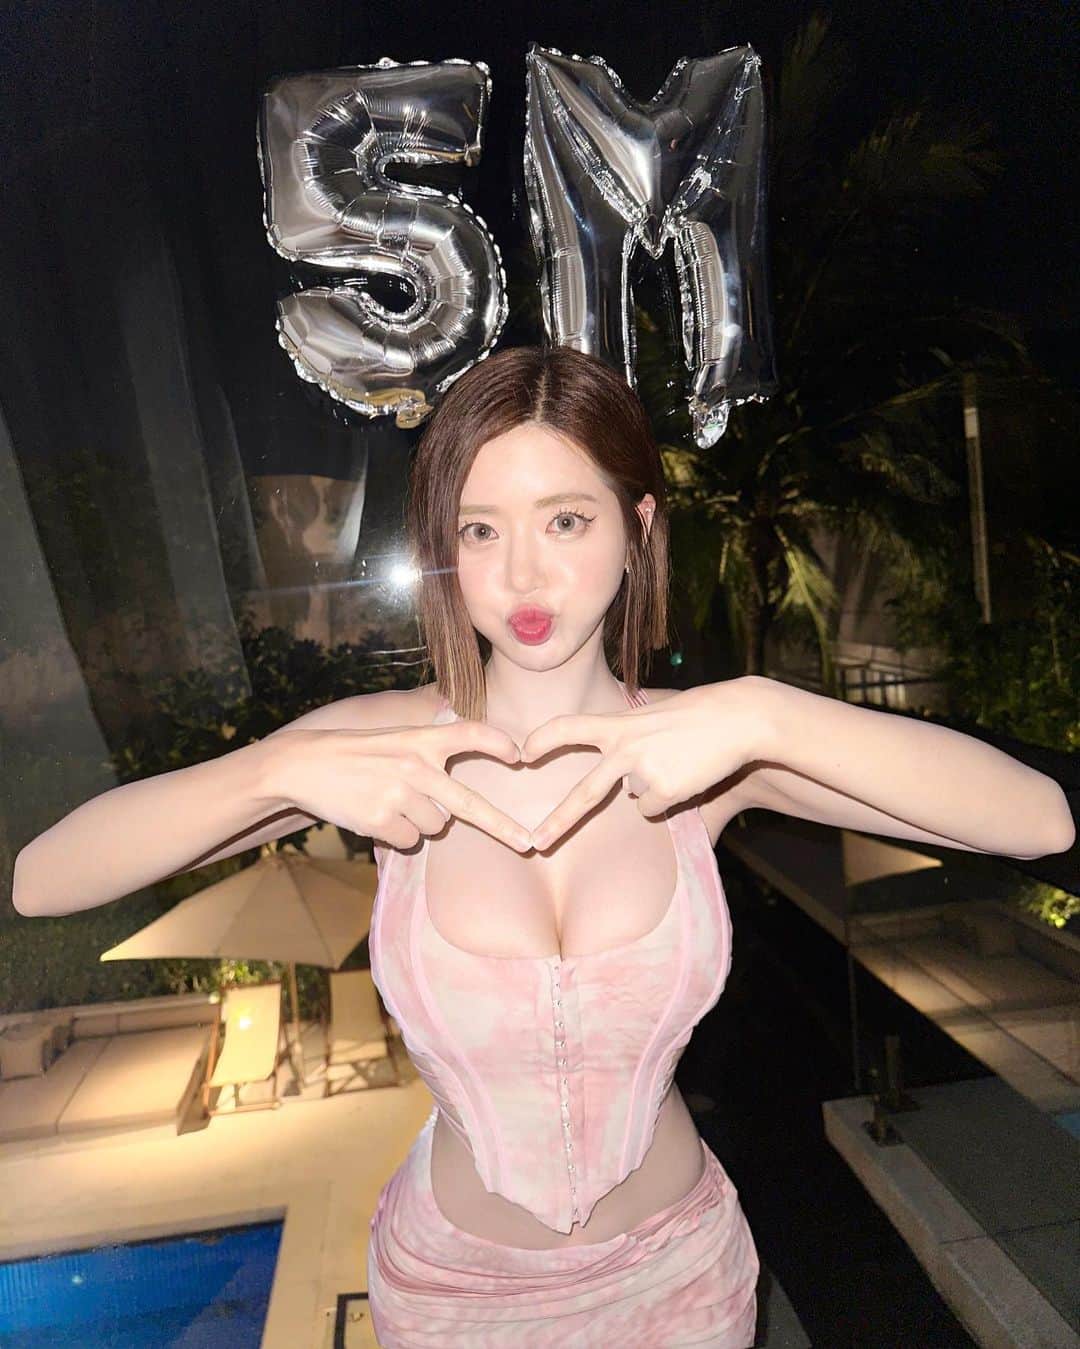 Dj Sodaのインスタグラム：「세상에!! 제가 드디어 5백만 팔로워를 달성했어요!!🎂❤️‍🔥 요즘은 돈으로도 쉽게 팔로워를 살 수 있는 세상이여서 가끔 팔로워를 돈주고 산거 아니냐는 오해를 받기도 해서 속상했지만 저를 믿어주고 사랑해주는 팬분들 덕분에 열심히 노력해서 온전히 제 힘으로 순수하게 만들었어요!! 정말 열심히 일했어요!!🥹🥹앞으로도 열심히 하는 모습 많이 보여드릴께요 감사합니다🙏🏻 Omg finally reached 5 million Instagram followers‼️🎉🎉 I gained my Instagram followers through sheer hard work without buying followers like others. These days a lot of people can easily buy followers with money, but I worked hard and made it with my fans.🥹🥹💕💕Sometimes I felt upset because I was doubts from others that I bought followers, but I made it on my own hard work. Thanks to my fans for always supporting me, love you all😘😘❤️‍🔥❤️‍🔥」